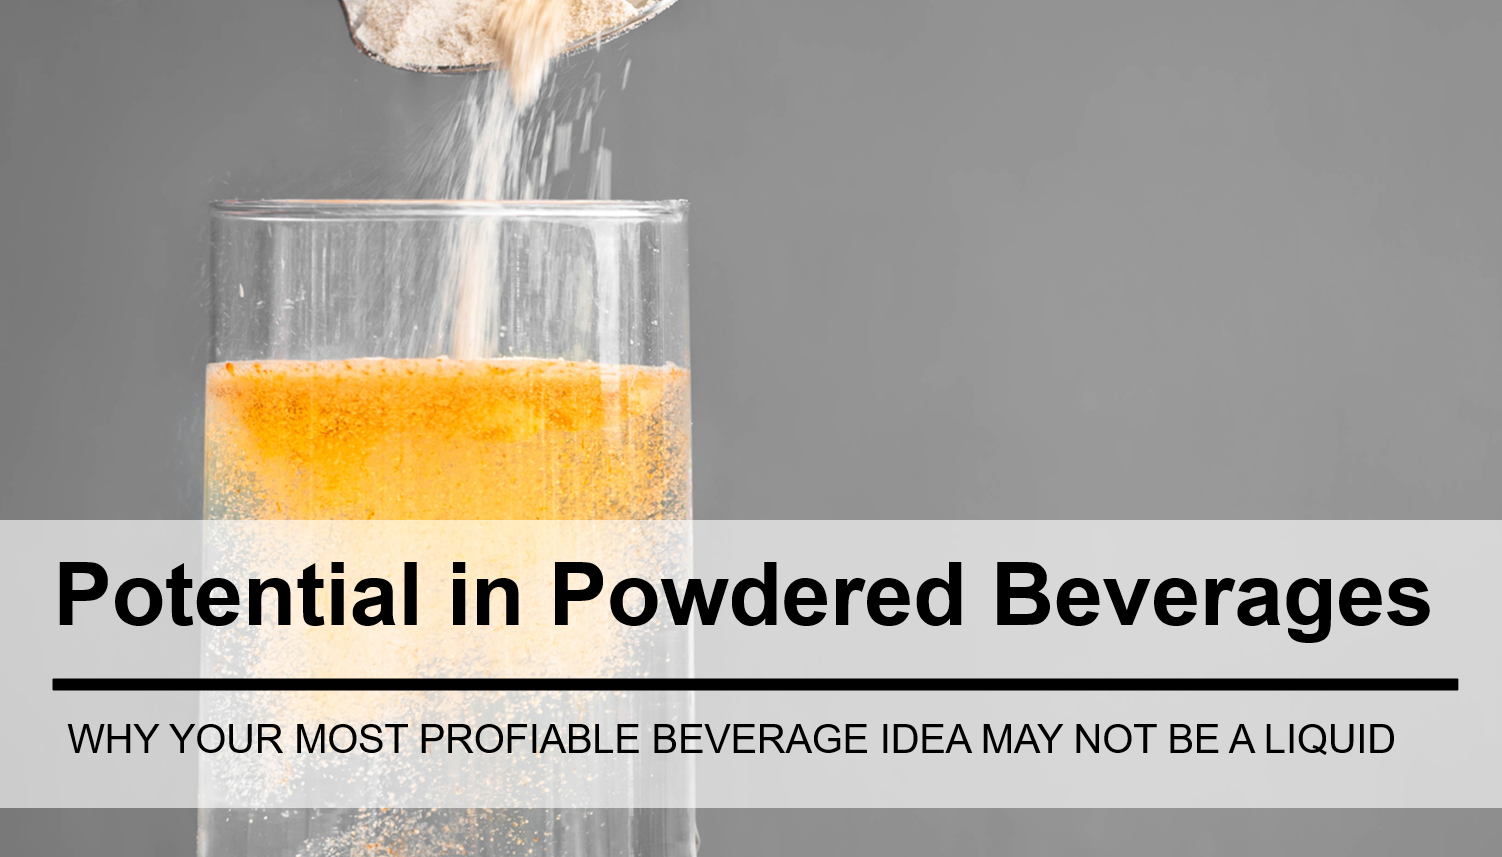 Potential in Powdered Beverages